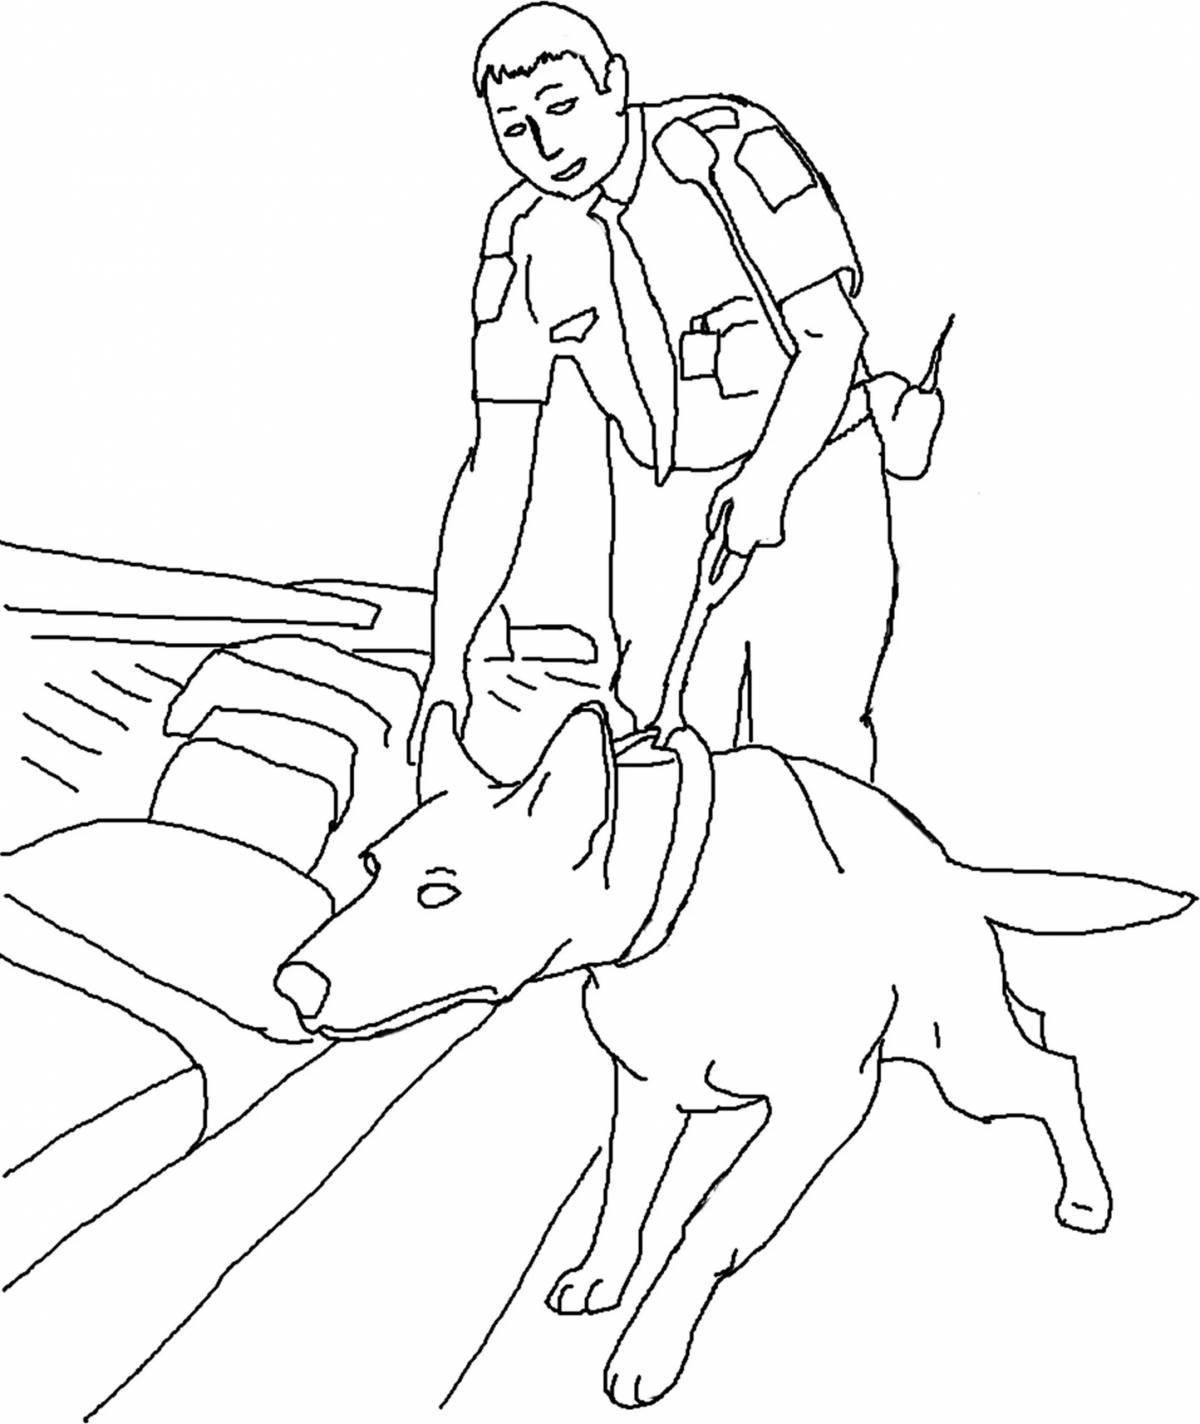 A majestic border guard with a dog